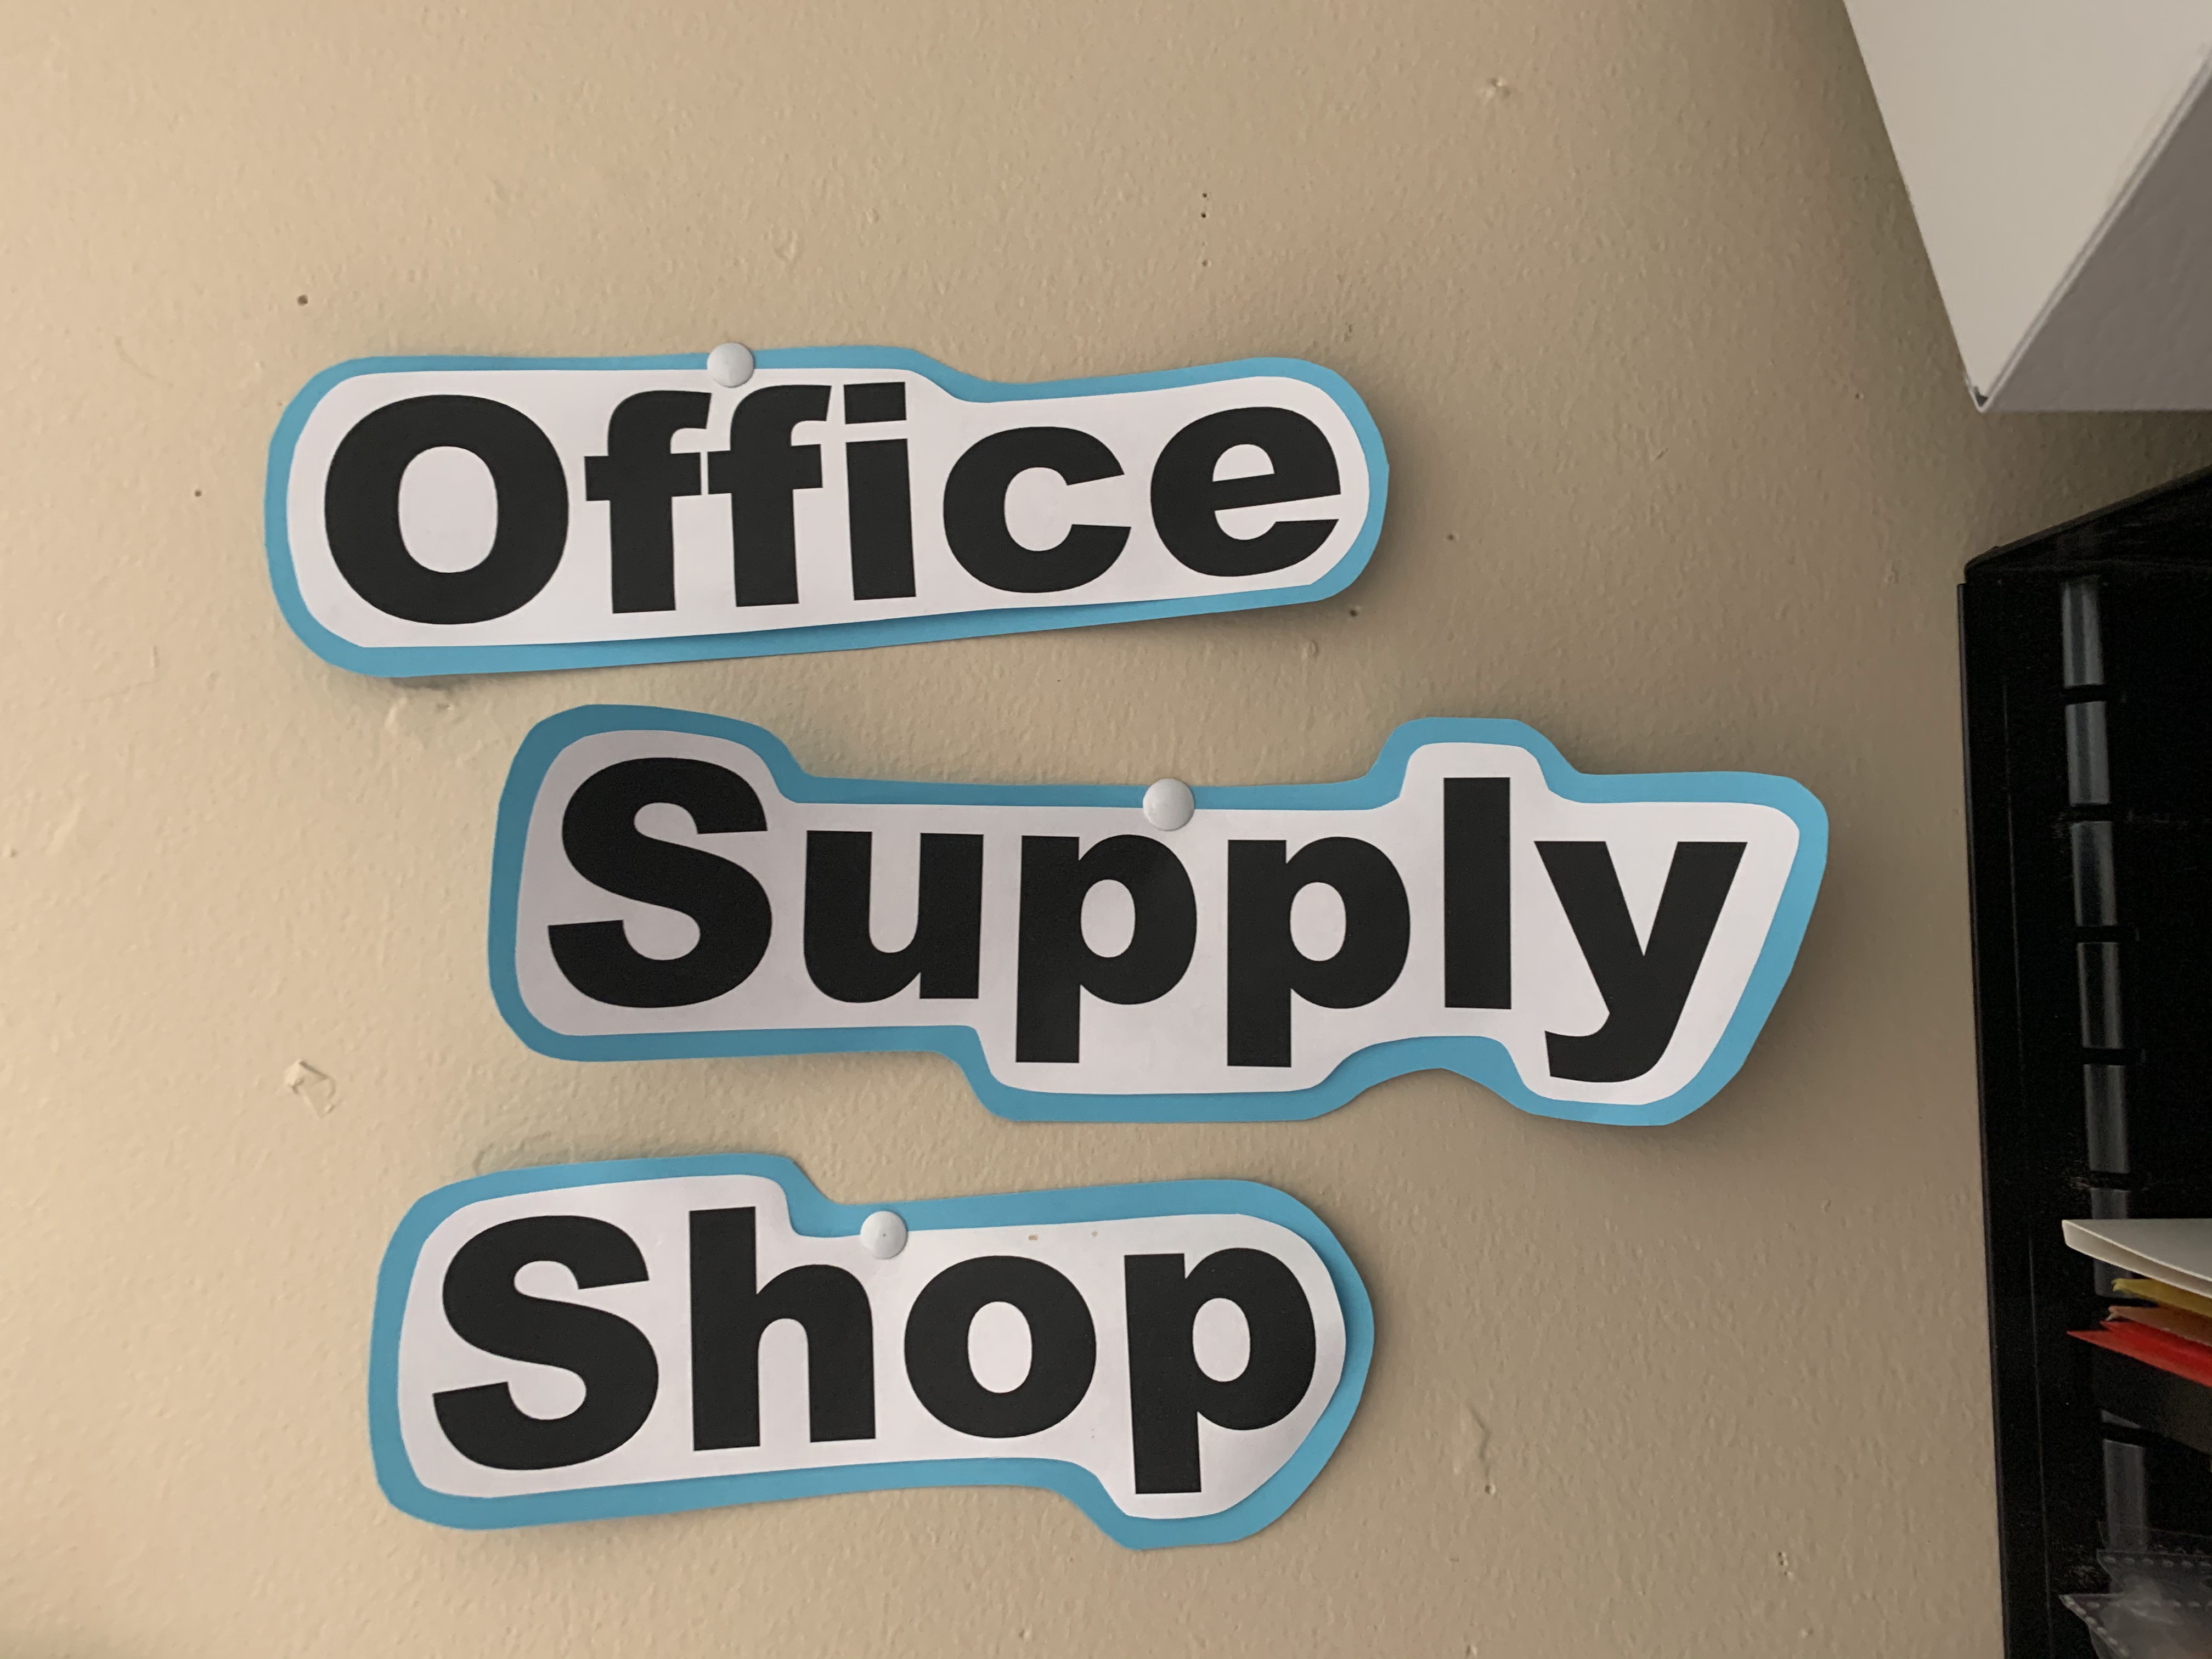 Office Supply Shop poster